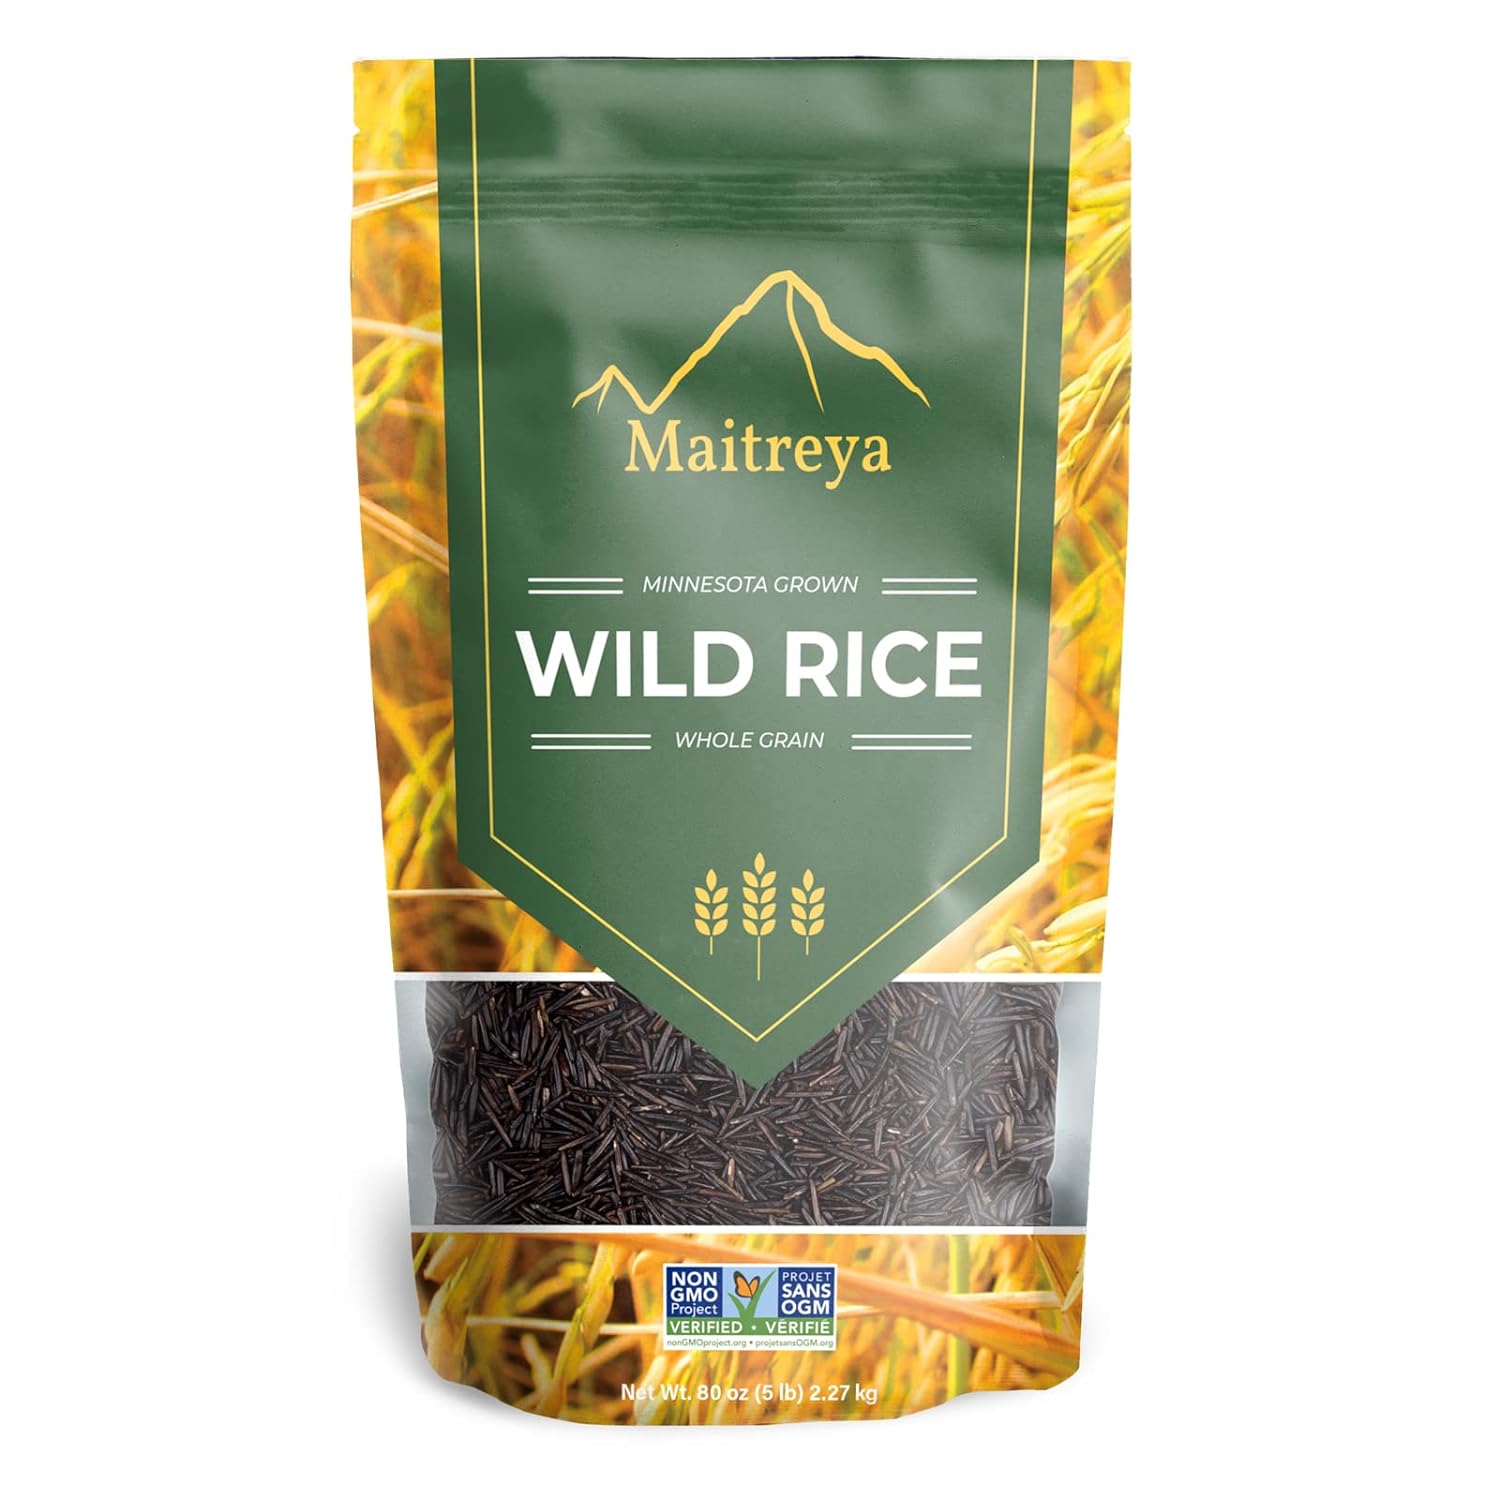 I recently decided to incorporate healthier grains into my diet and came across the 100% All Natural NON-GMO Minnesota Wild Rice. After consuming it for several weeks, I can confidently say that this 5lb bag of wild rice is a culinary gem.**Authenticity and Quality:** This Minnesota wild rice is a true representation of natural, unprocessed grains. The non-GMO promise adds an extra layer of reassurance about the quality and purity of the product. Each grain is long, unbroken, and has a beautiful natural variance in color, indicating minimal processing.**Flavor Profile:** The wild rice has a unique, nutty flavor that is more pronounced than traditional white or brown rice. It's earthy and rich, adding depth to any dish it's incorporated into. This robust flavor makes it a versatile ingredient suitable for a variety of recipes, from salads to pilafs.**Texture:** After cooking, the grains remain distinct and slightly chewy, providing a pleasing texture. It's a delightful change from the softness of white rice and adds an interesting element to meals.**Nutritional Value:** As a health-conscious consumer, I appreciate the nutritional benefits of this wild rice. It's high in fiber, protein, and essential minerals, making it a nutritious alternative to other grains. Its low-fat content also aligns with healthier eating habits.**Cooking Experience:** The rice cooks evenly and is relatively forgiving in terms of preparation. While it takes longer to cook than some other grains, the end result is worth the wait. I found that soaking it for an hour before cooking reduces the cooking time and enhances the texture.**Packaging and Quantity:** The 5lb bag is convenient and provides excellent value, especially for those who plan to use it regularly. The packaging is simple and functional, ensuring the rice stays fresh.**Versatility in Cooking:** This wild rice shines in a variety of dishes. It pairs wonderfully with both meat and vegetarian recipes, and can even be used in soups and stews.**Limitations:** The only minor drawback is the longer cooking time compared to other rice varieties, which might be a consideration for those with time constraints.**Conclusion:** The 100% All Natural NON-GMO Minnesota Wild Rice is an outstanding product for anyone looking to explore healthier and more flavorful grain options. Its rich flavor, nutritional benefits, and versatility in cooking make it a must-have in any kitchen. This wild rice is not just a side dish, but a star ingredient that can elevate the simplest meals to something truly special.